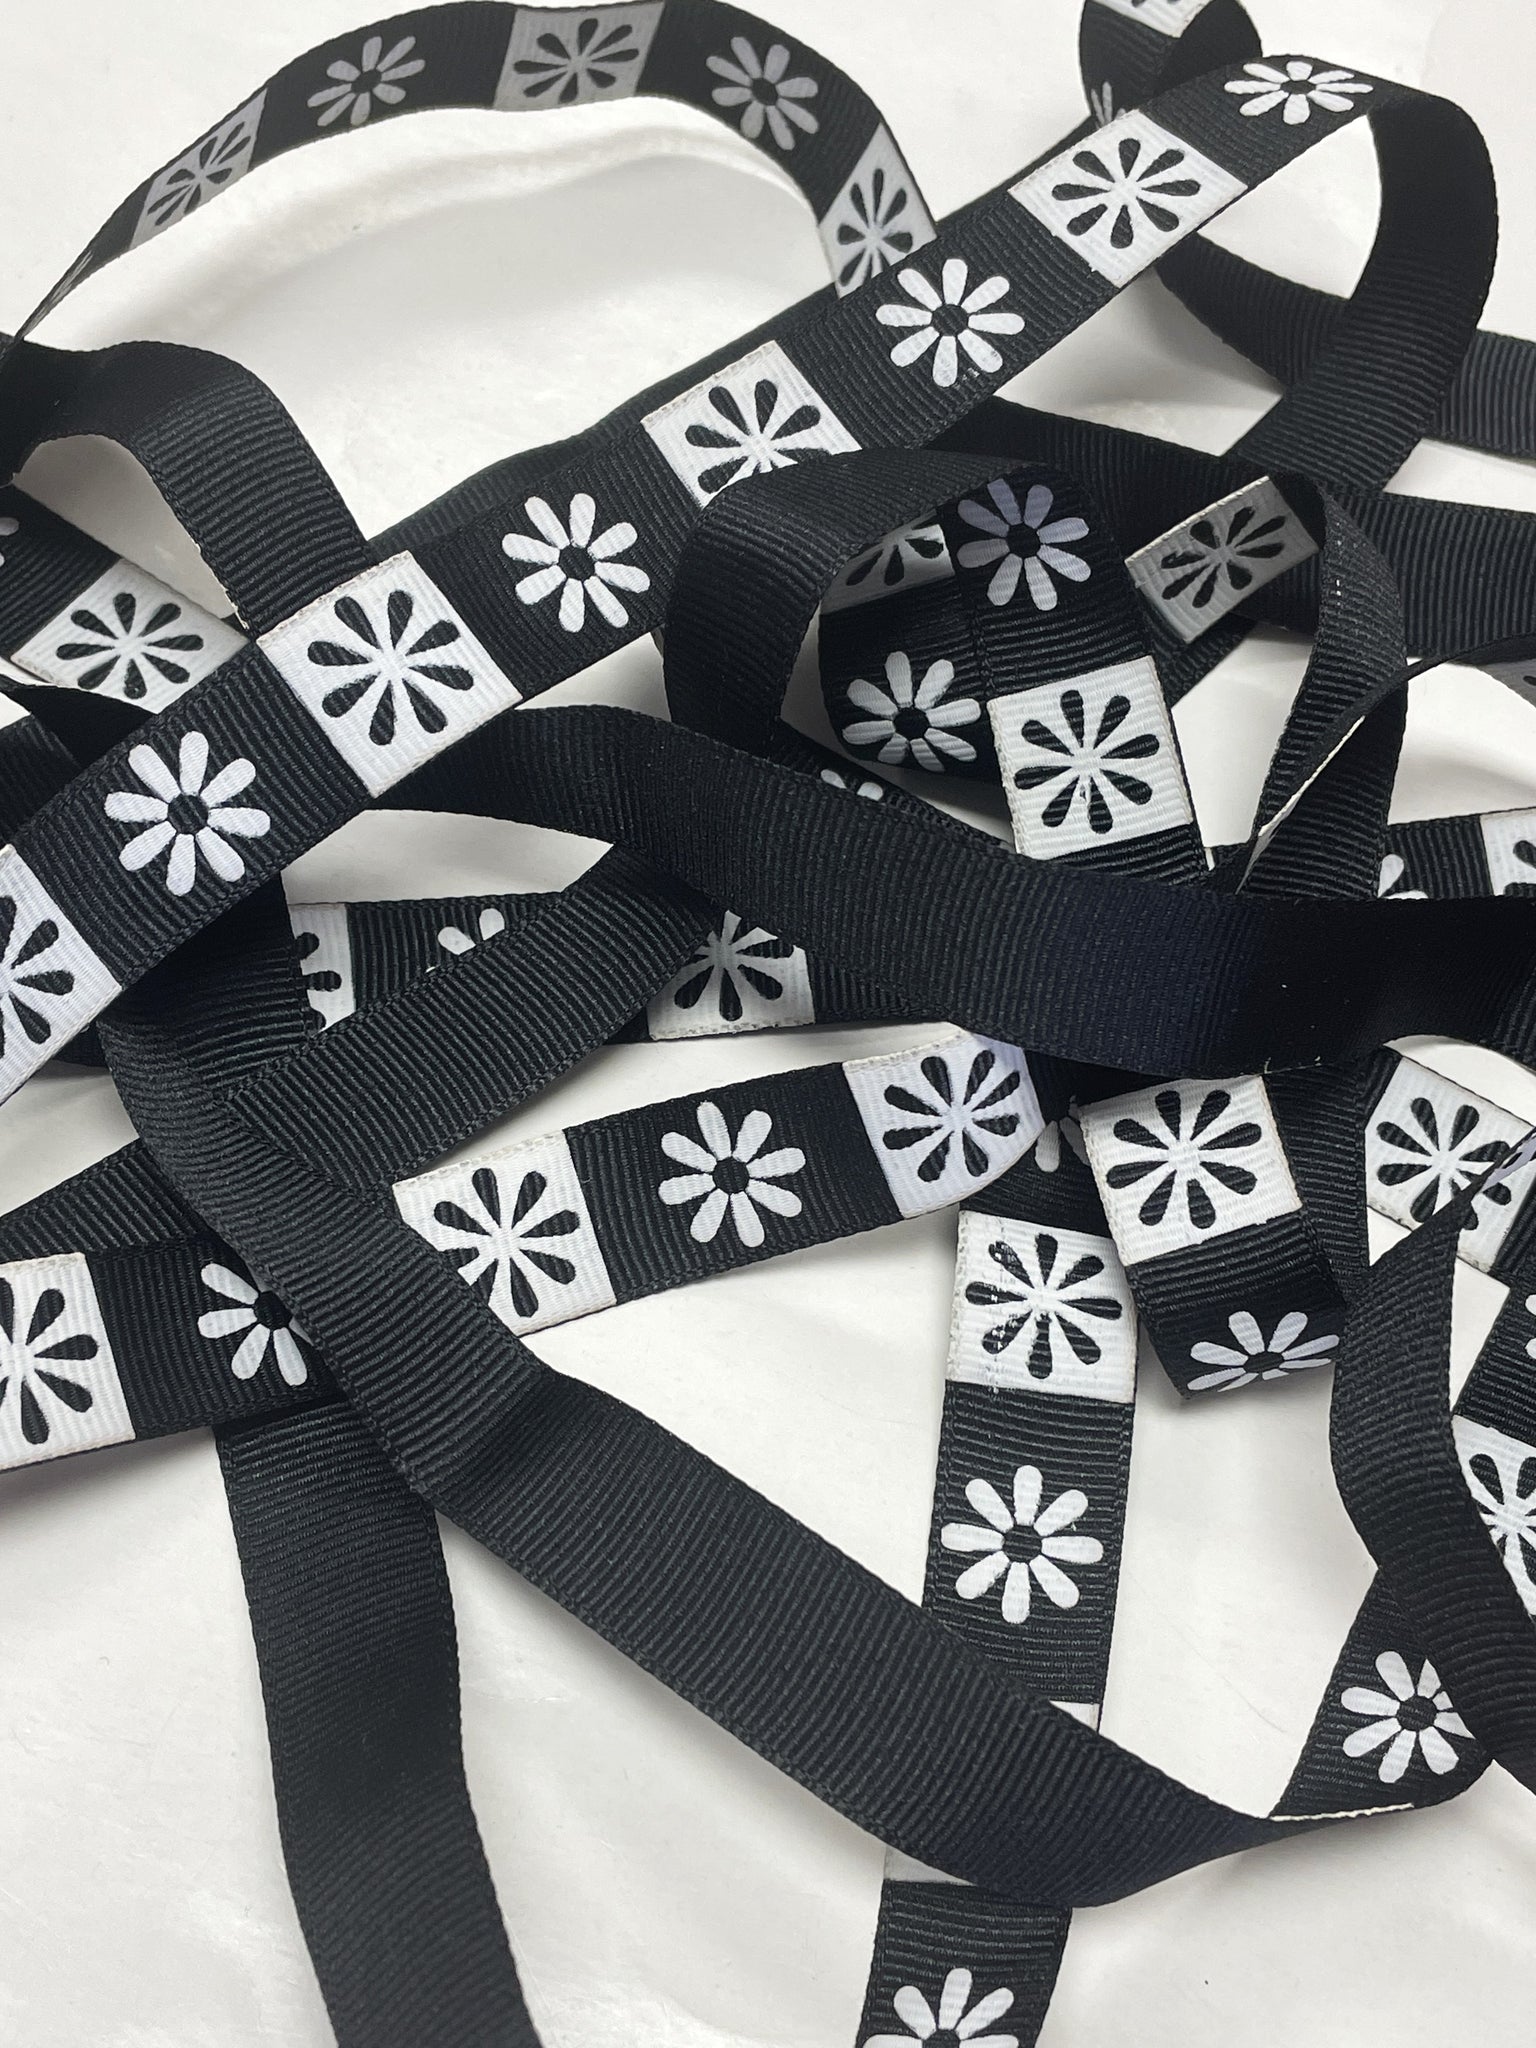 6 1/4 YD Polyester Grosgrain Ribbon - Black and Printed with White Flowers